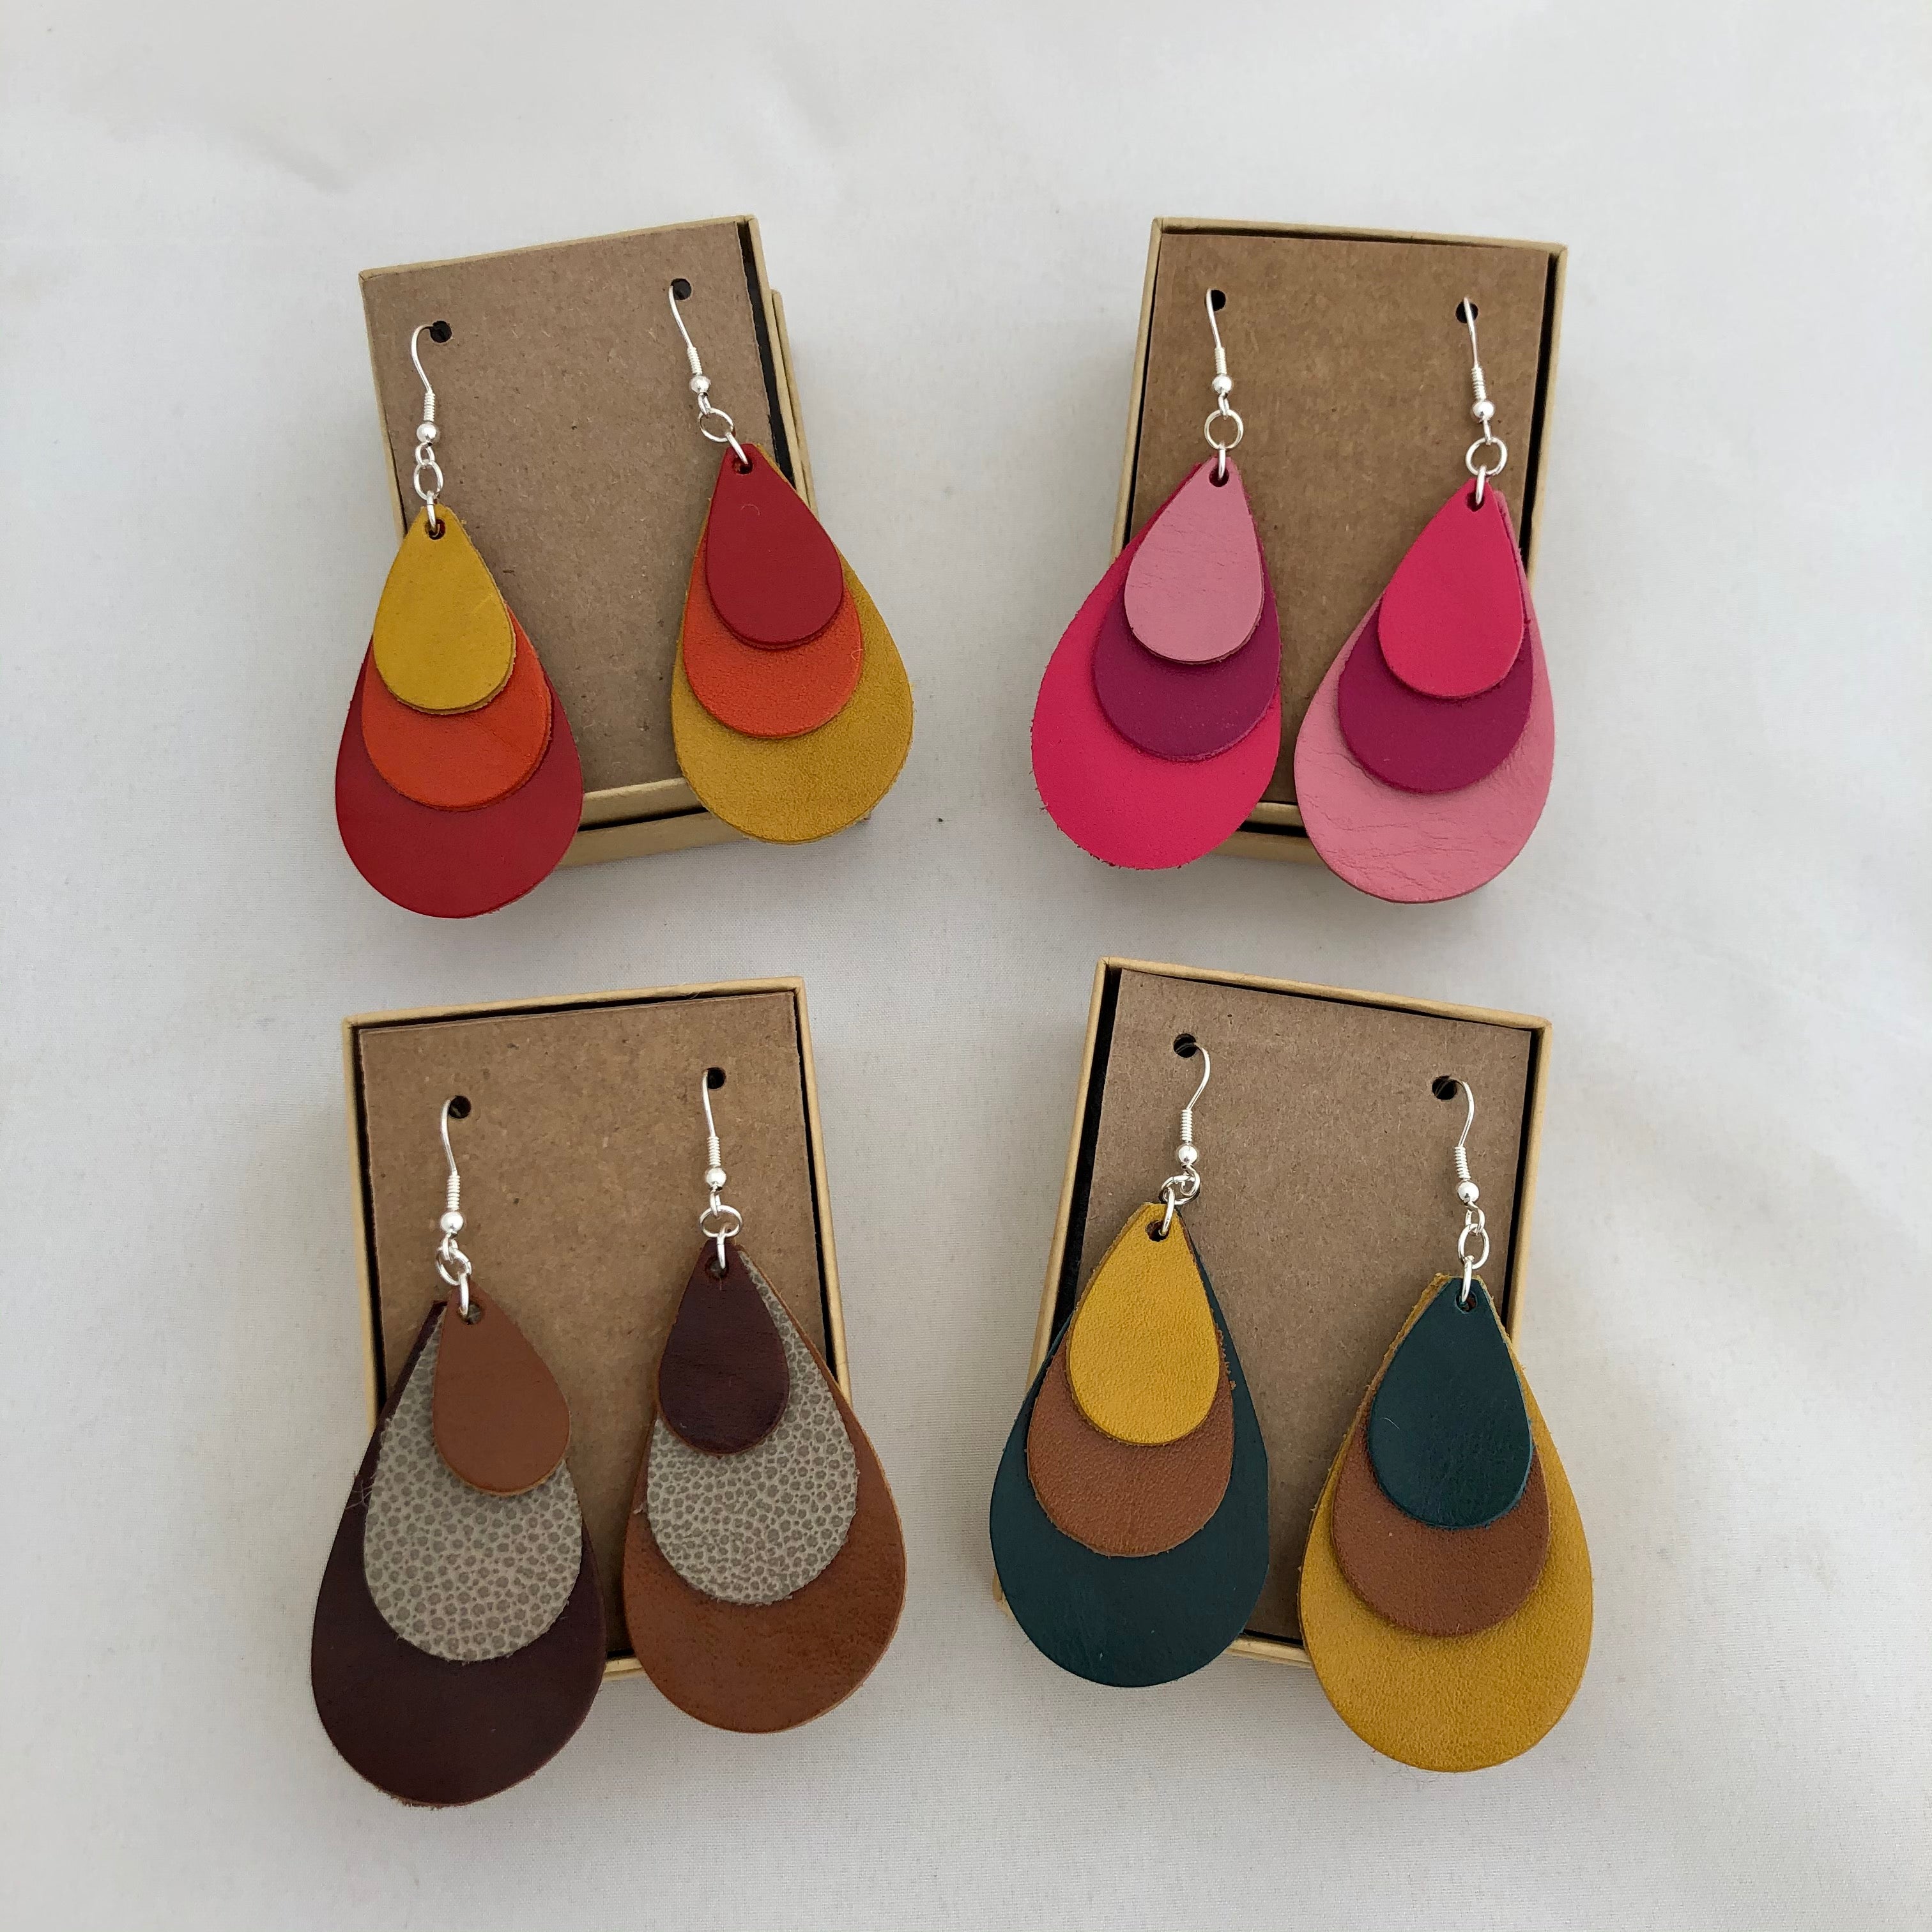 Tri Color Leather Rainbow Earrings in 4 color options: Red Orange Yellow, Shades of Pink, Shades of Brown, and Teal Brown Yellow. All earrings are pictured against a white background on brown cards in included jewelry boxes.